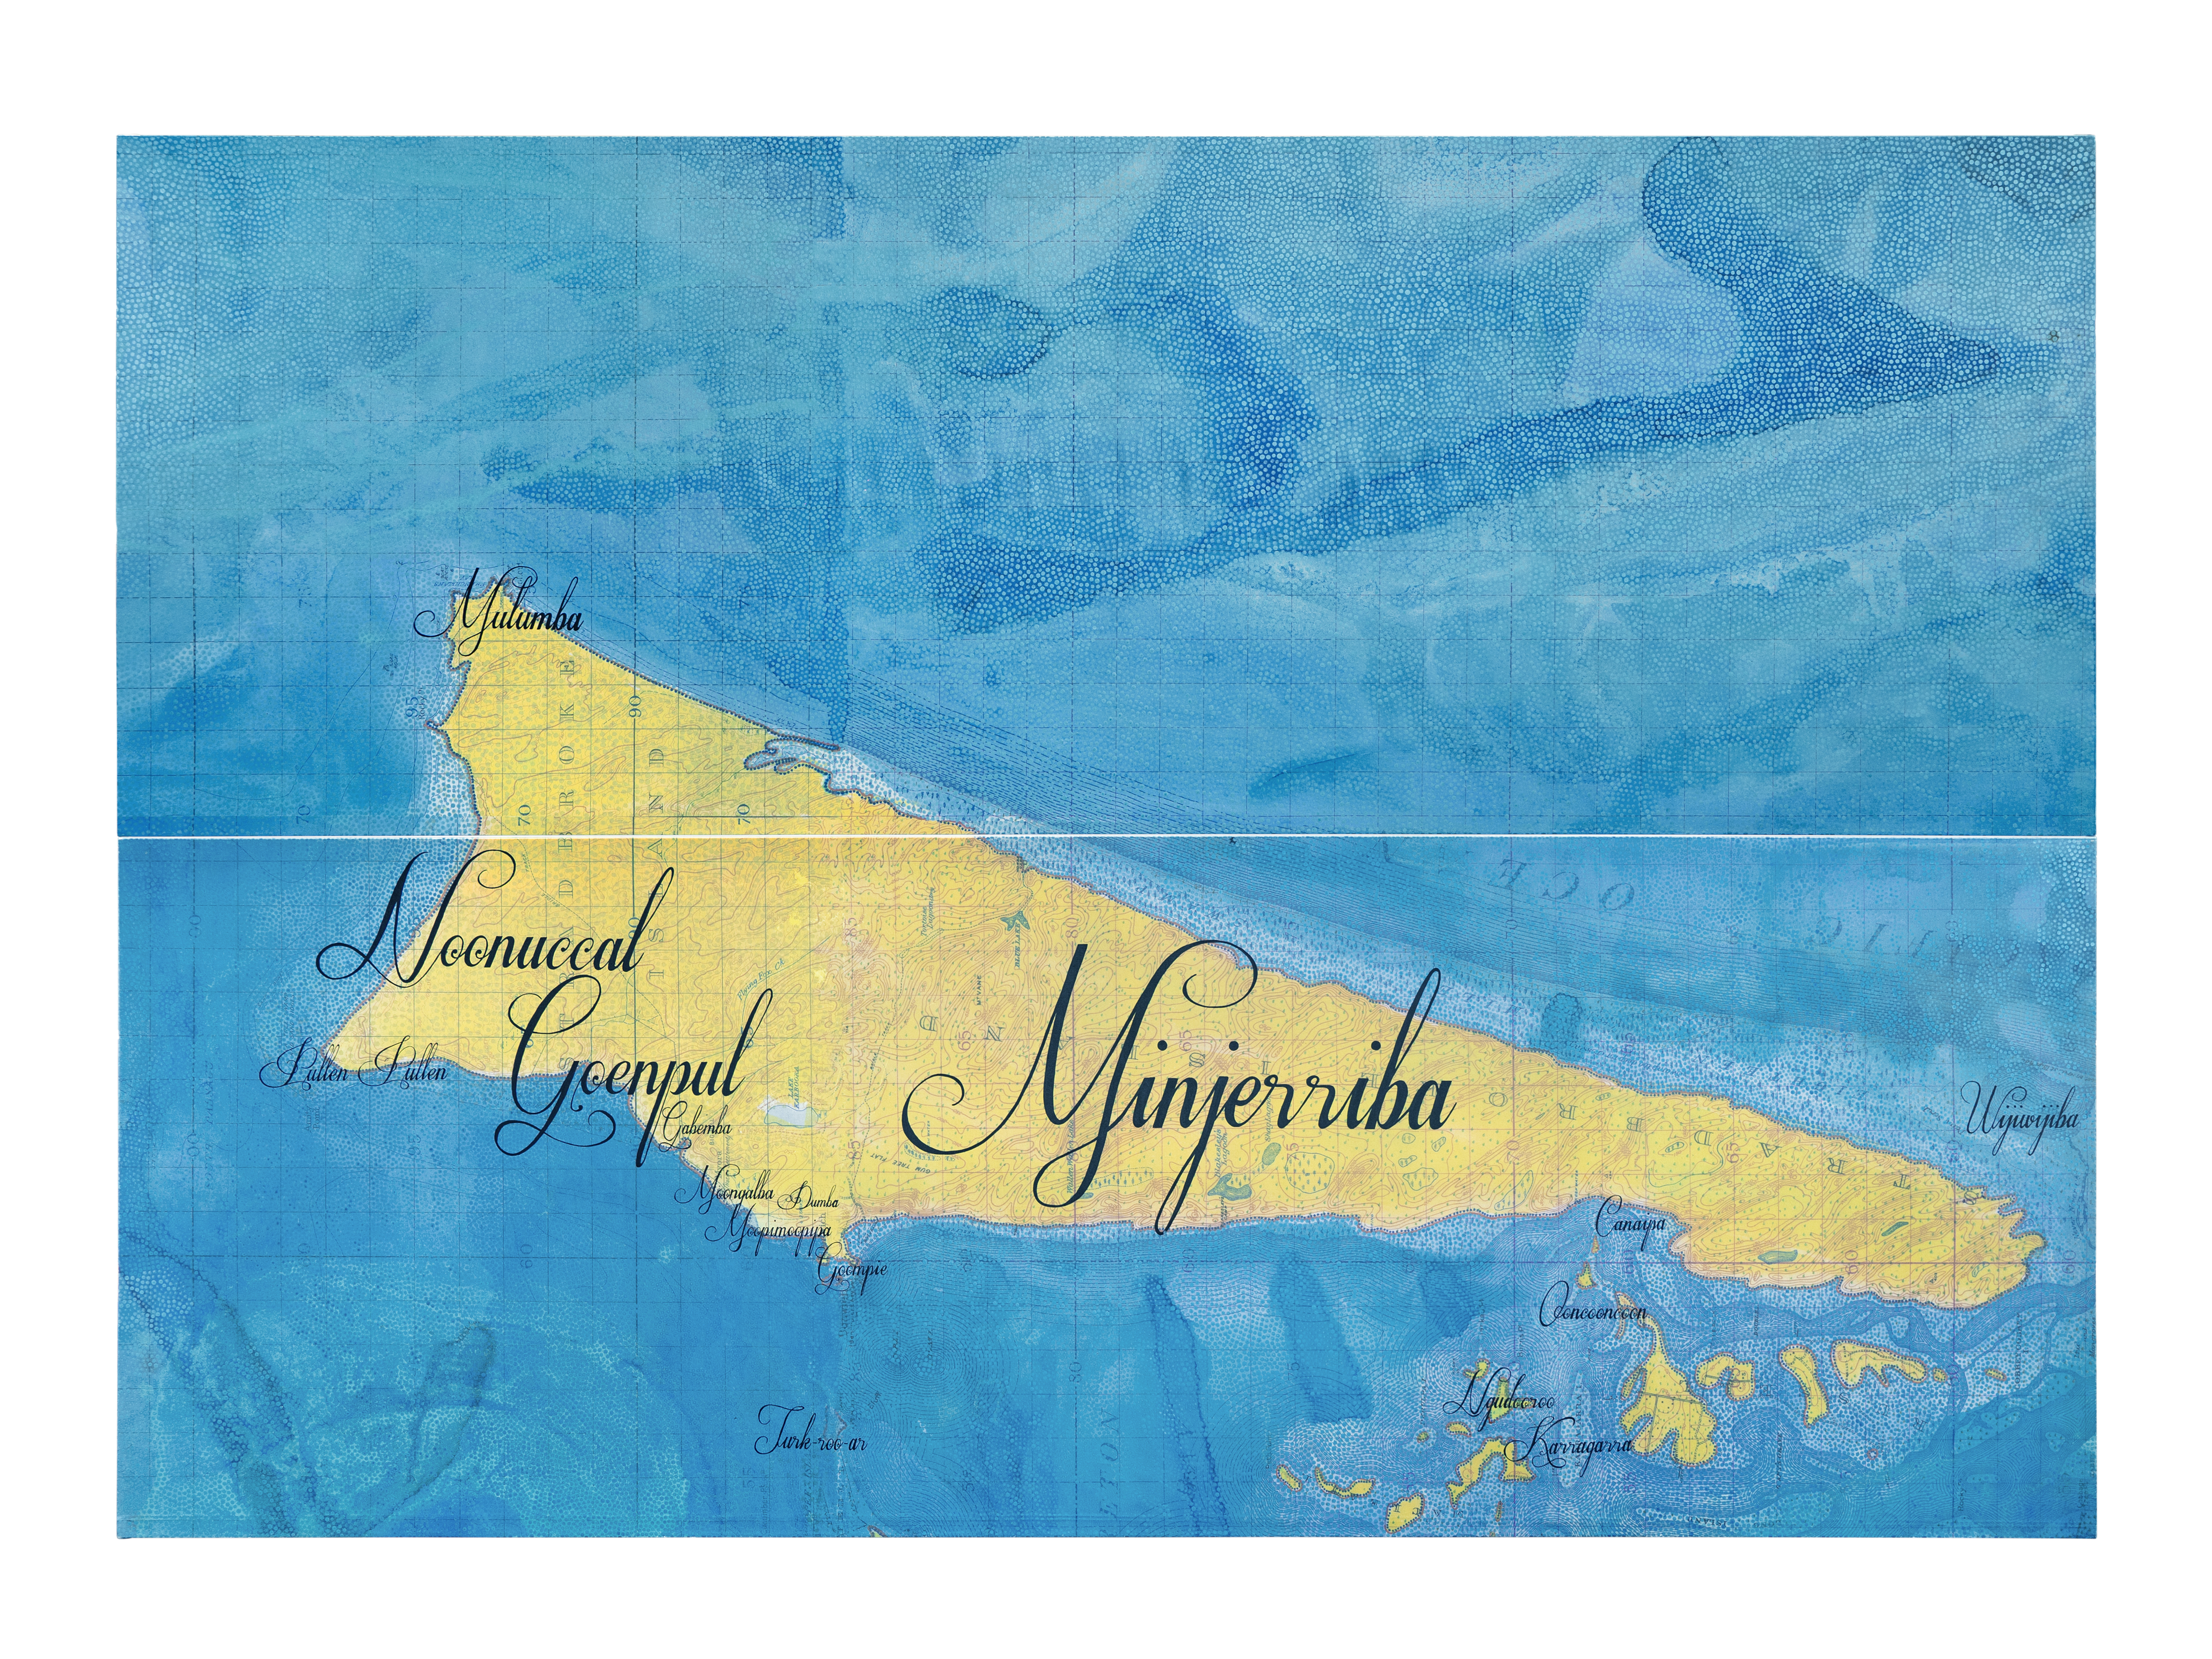 Painting of a map of an island surrounded by sea, with text depicting Indigenous place names. 